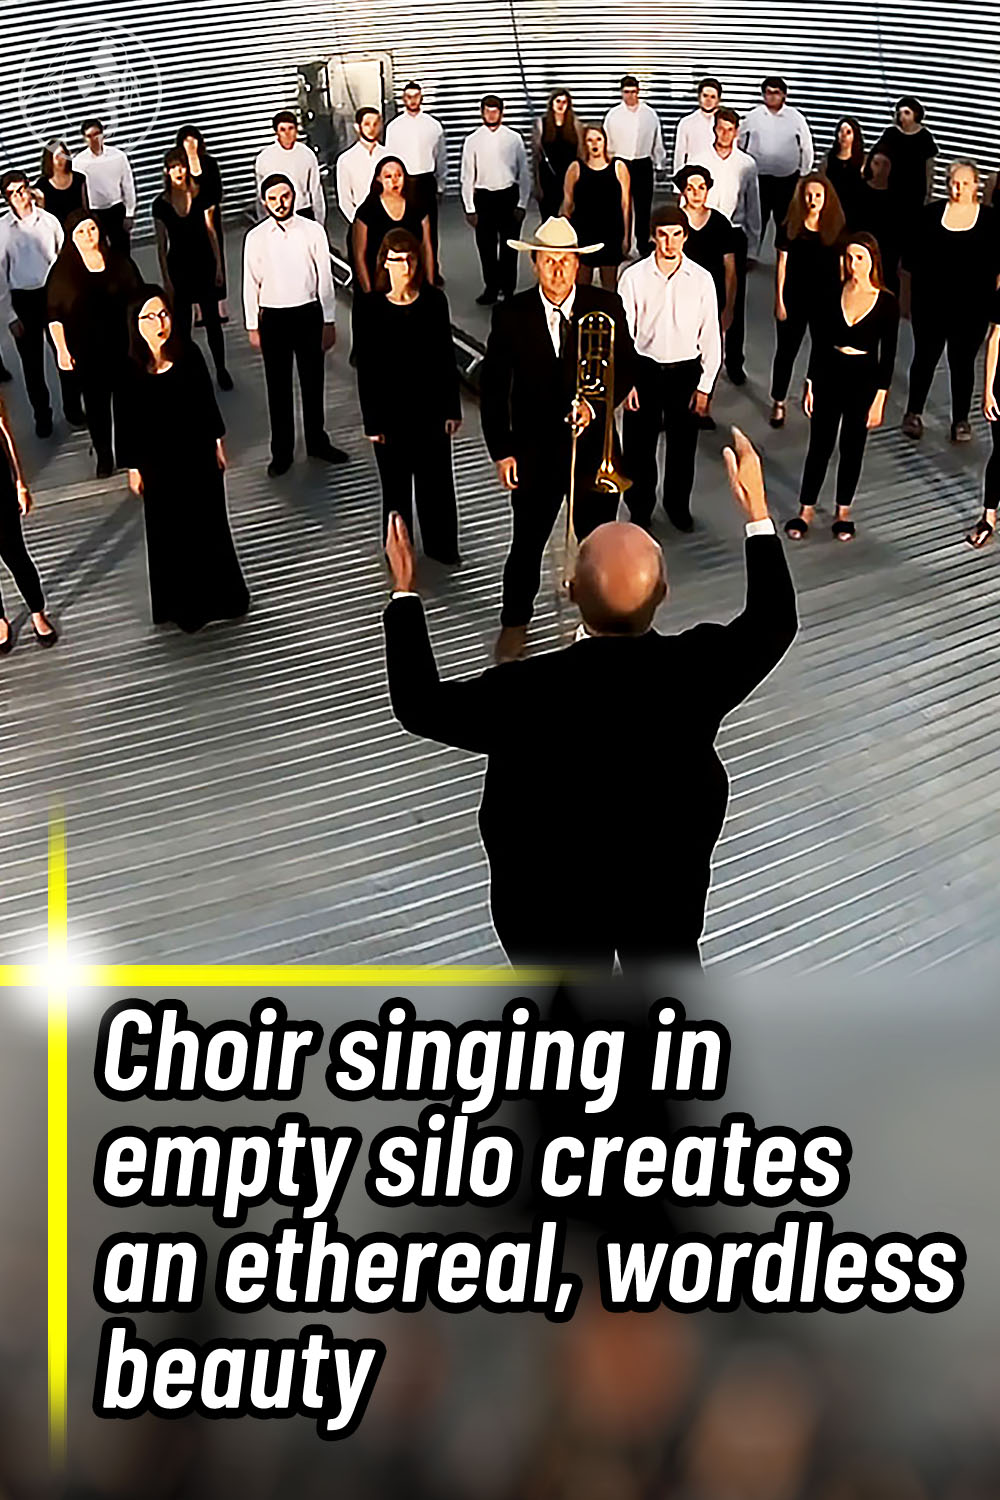 Choir singing in empty silo creates an ethereal, wordless beauty